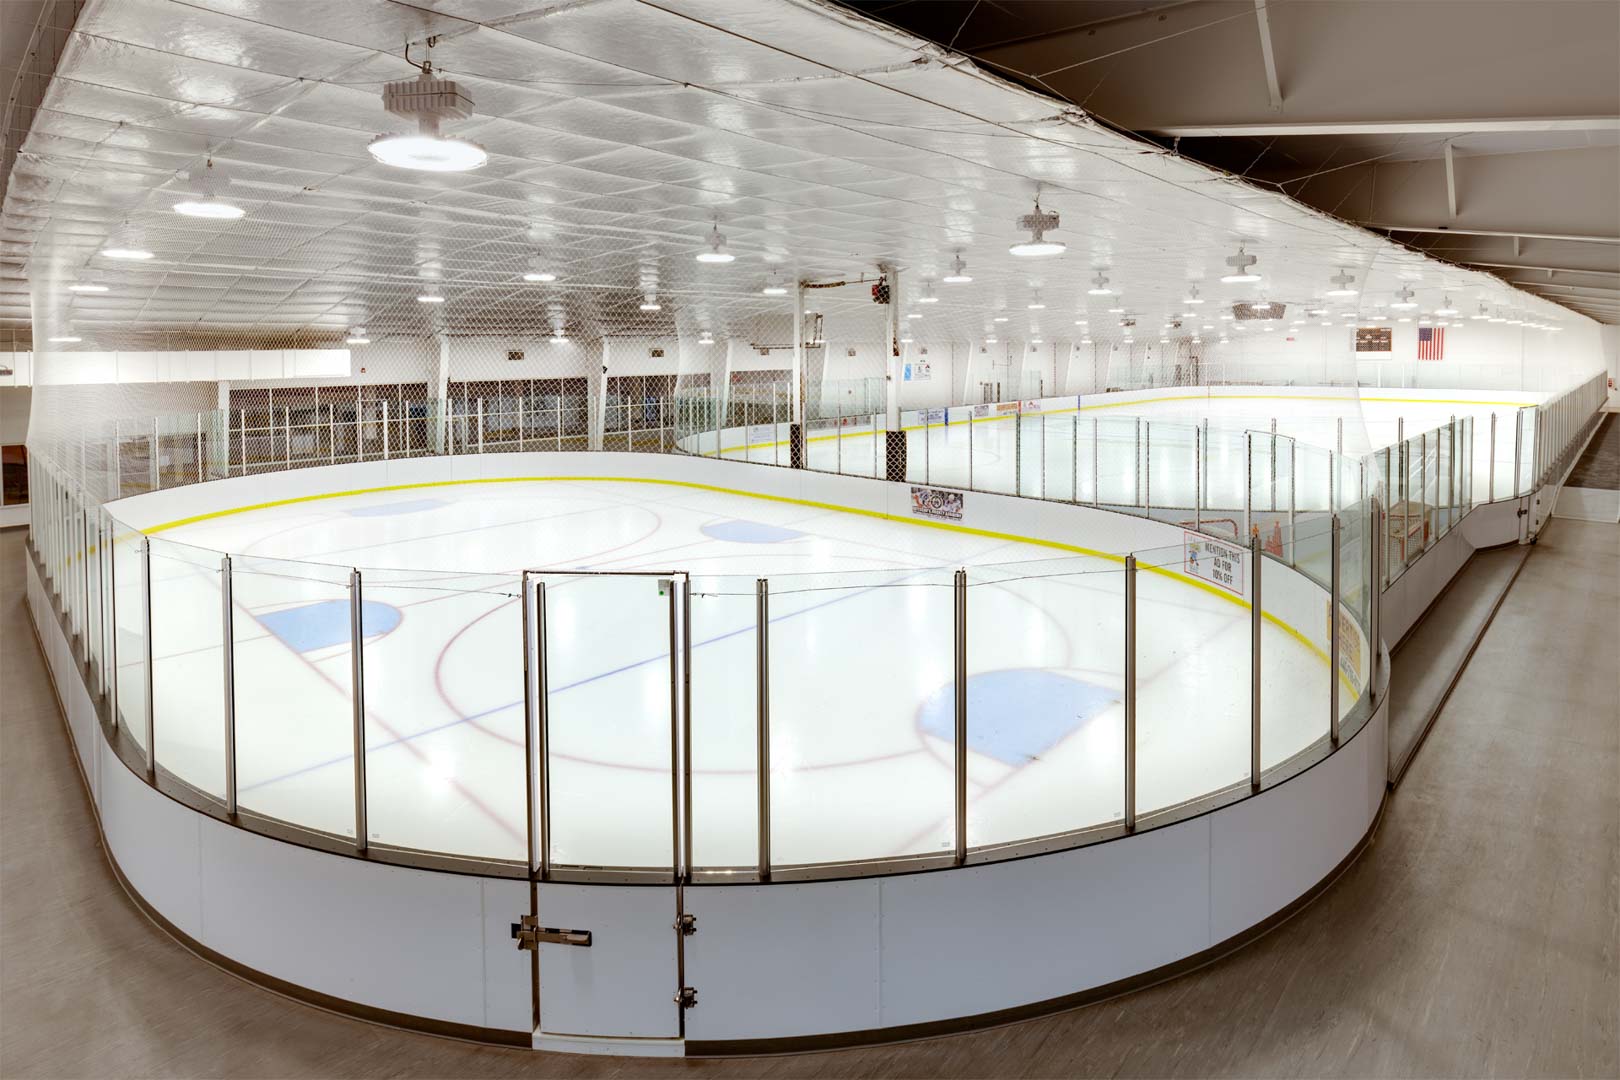 Alternate view of ice rink